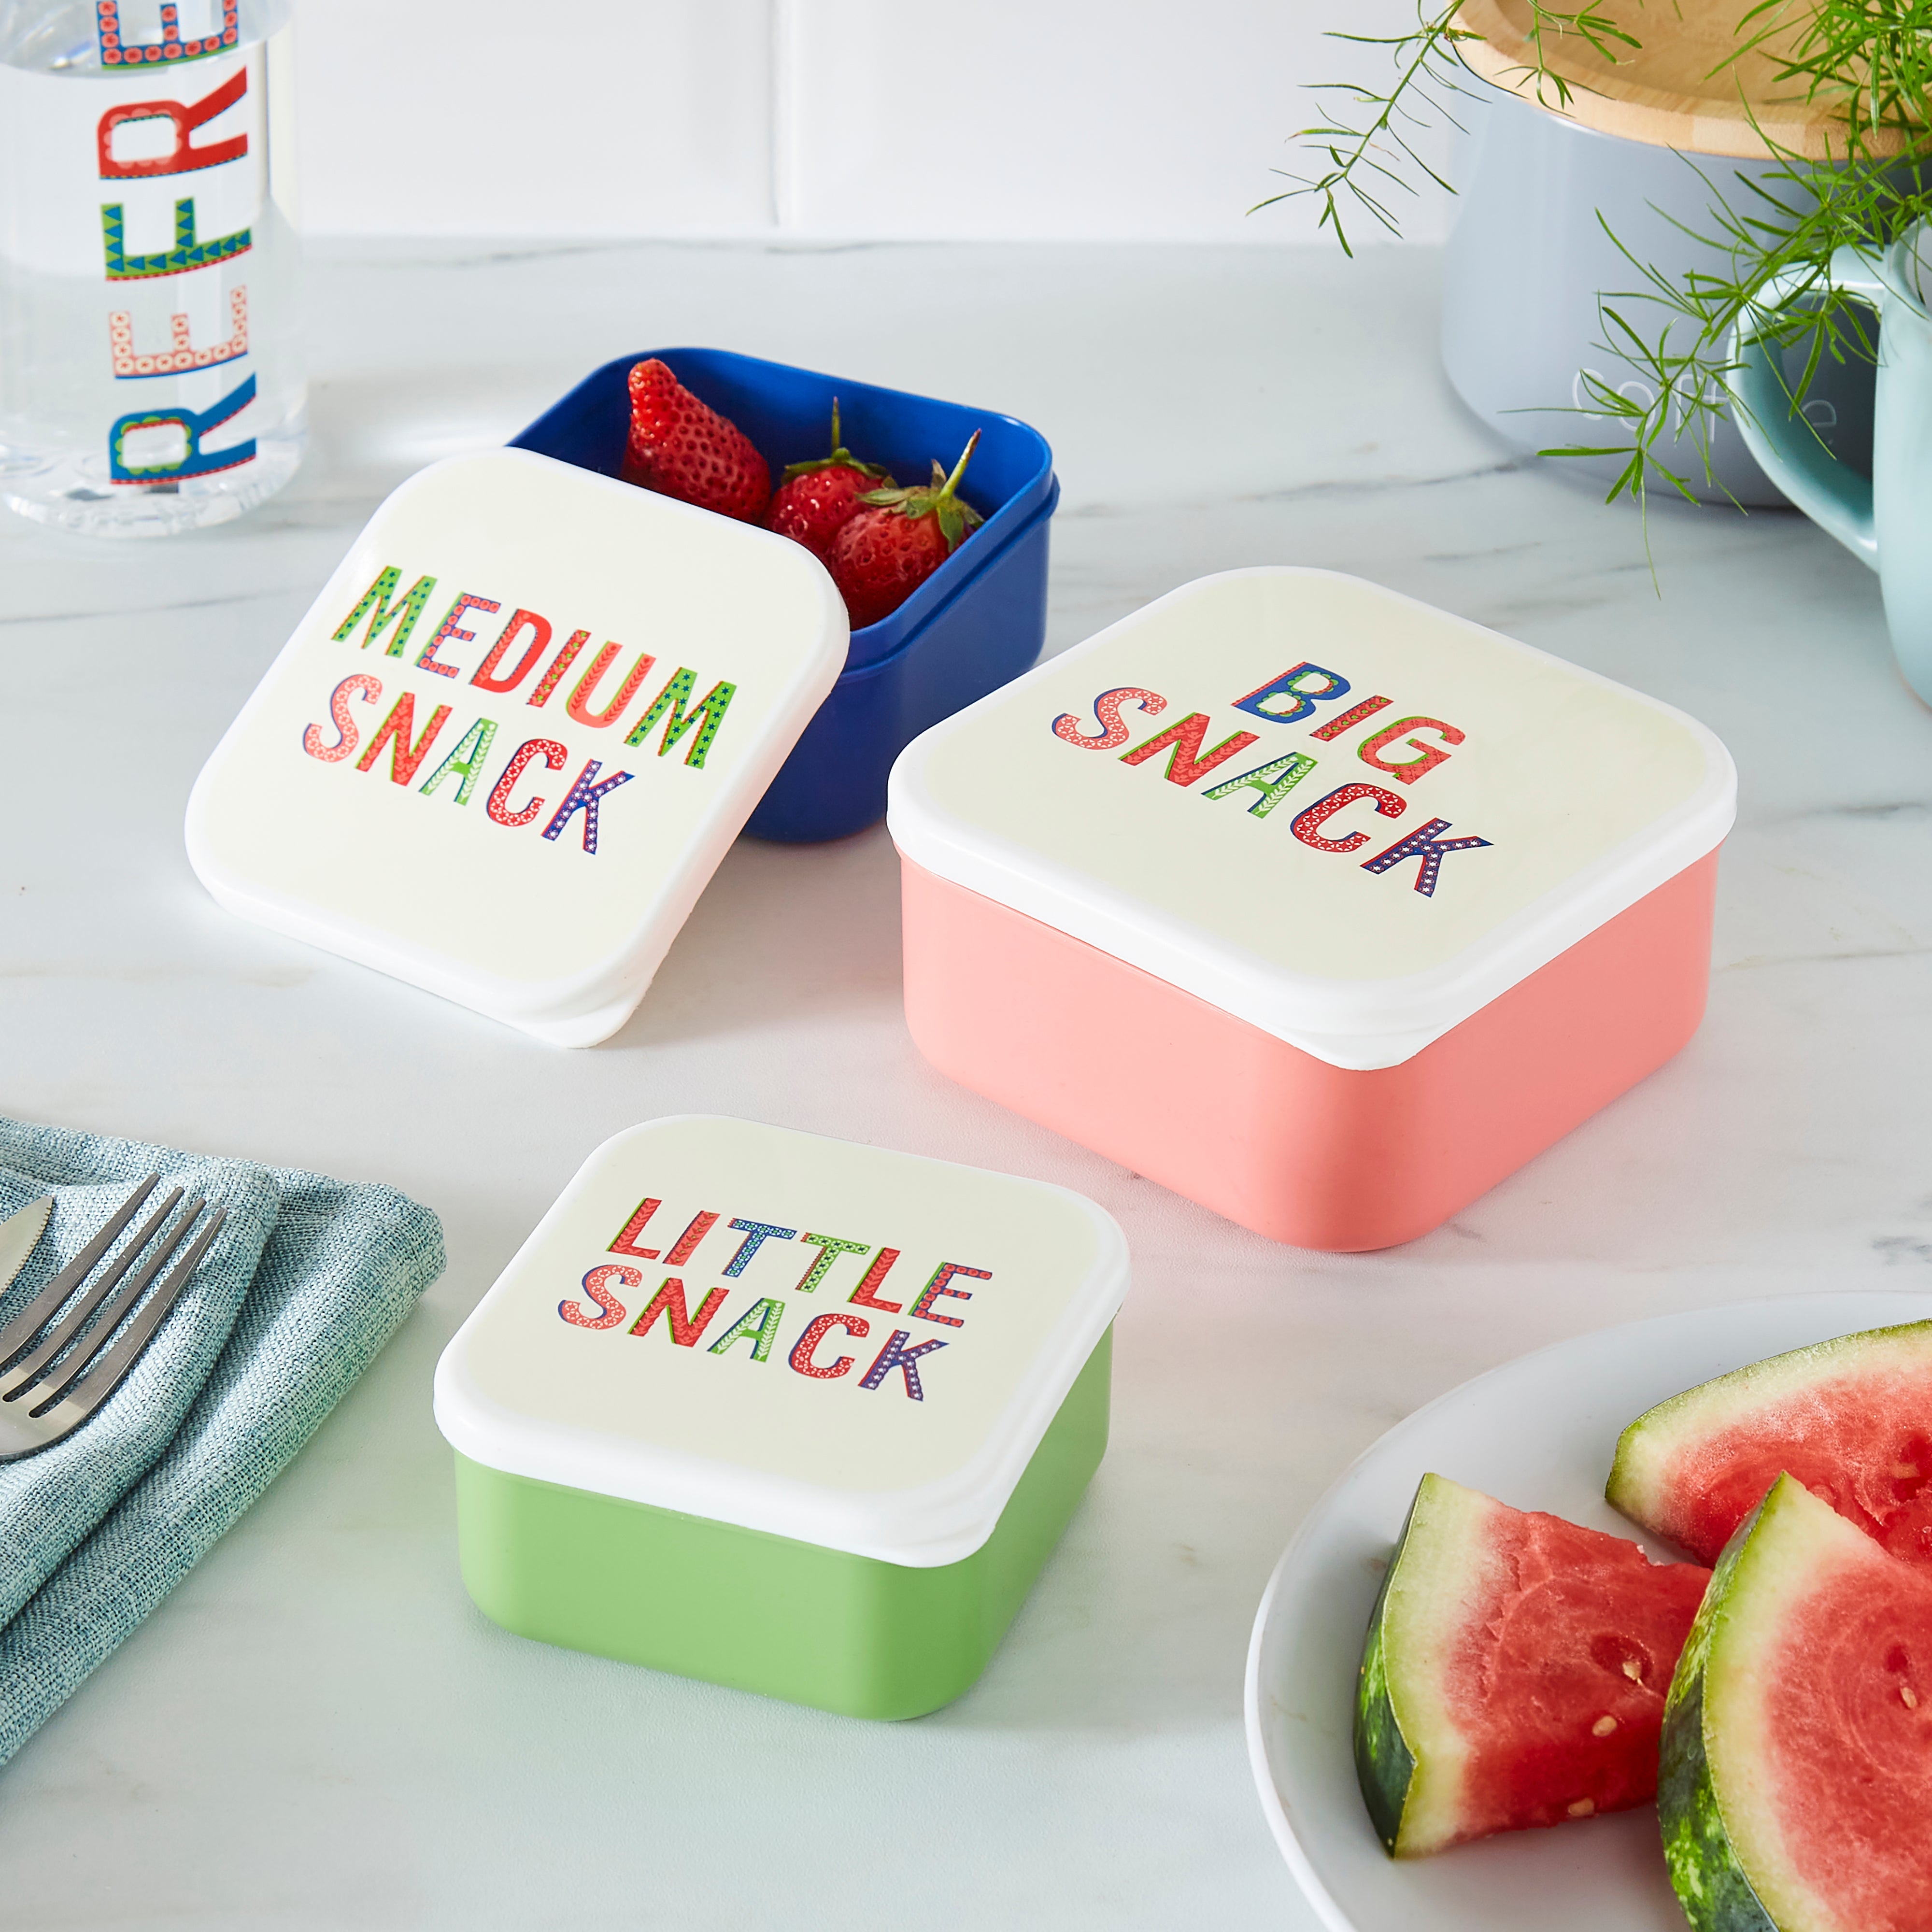 Shop Now Slogan Snack Boxes Set of 3, small snack box